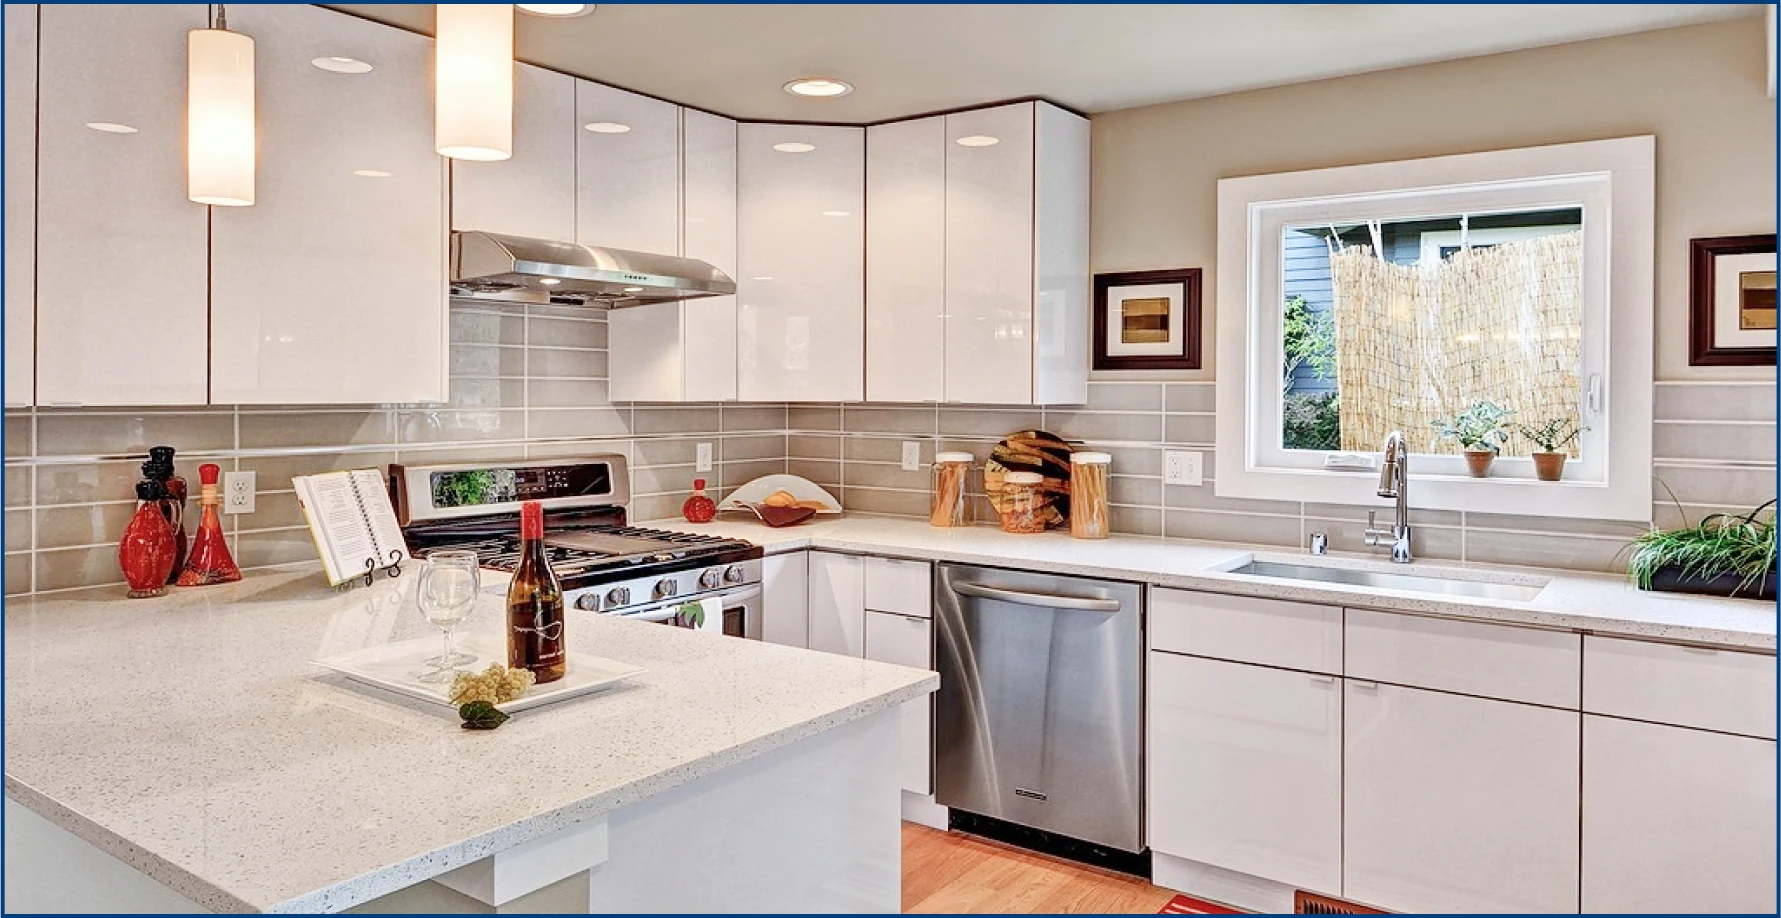 A kitchen with flat-panel white cabinets from Badger Cabinets.